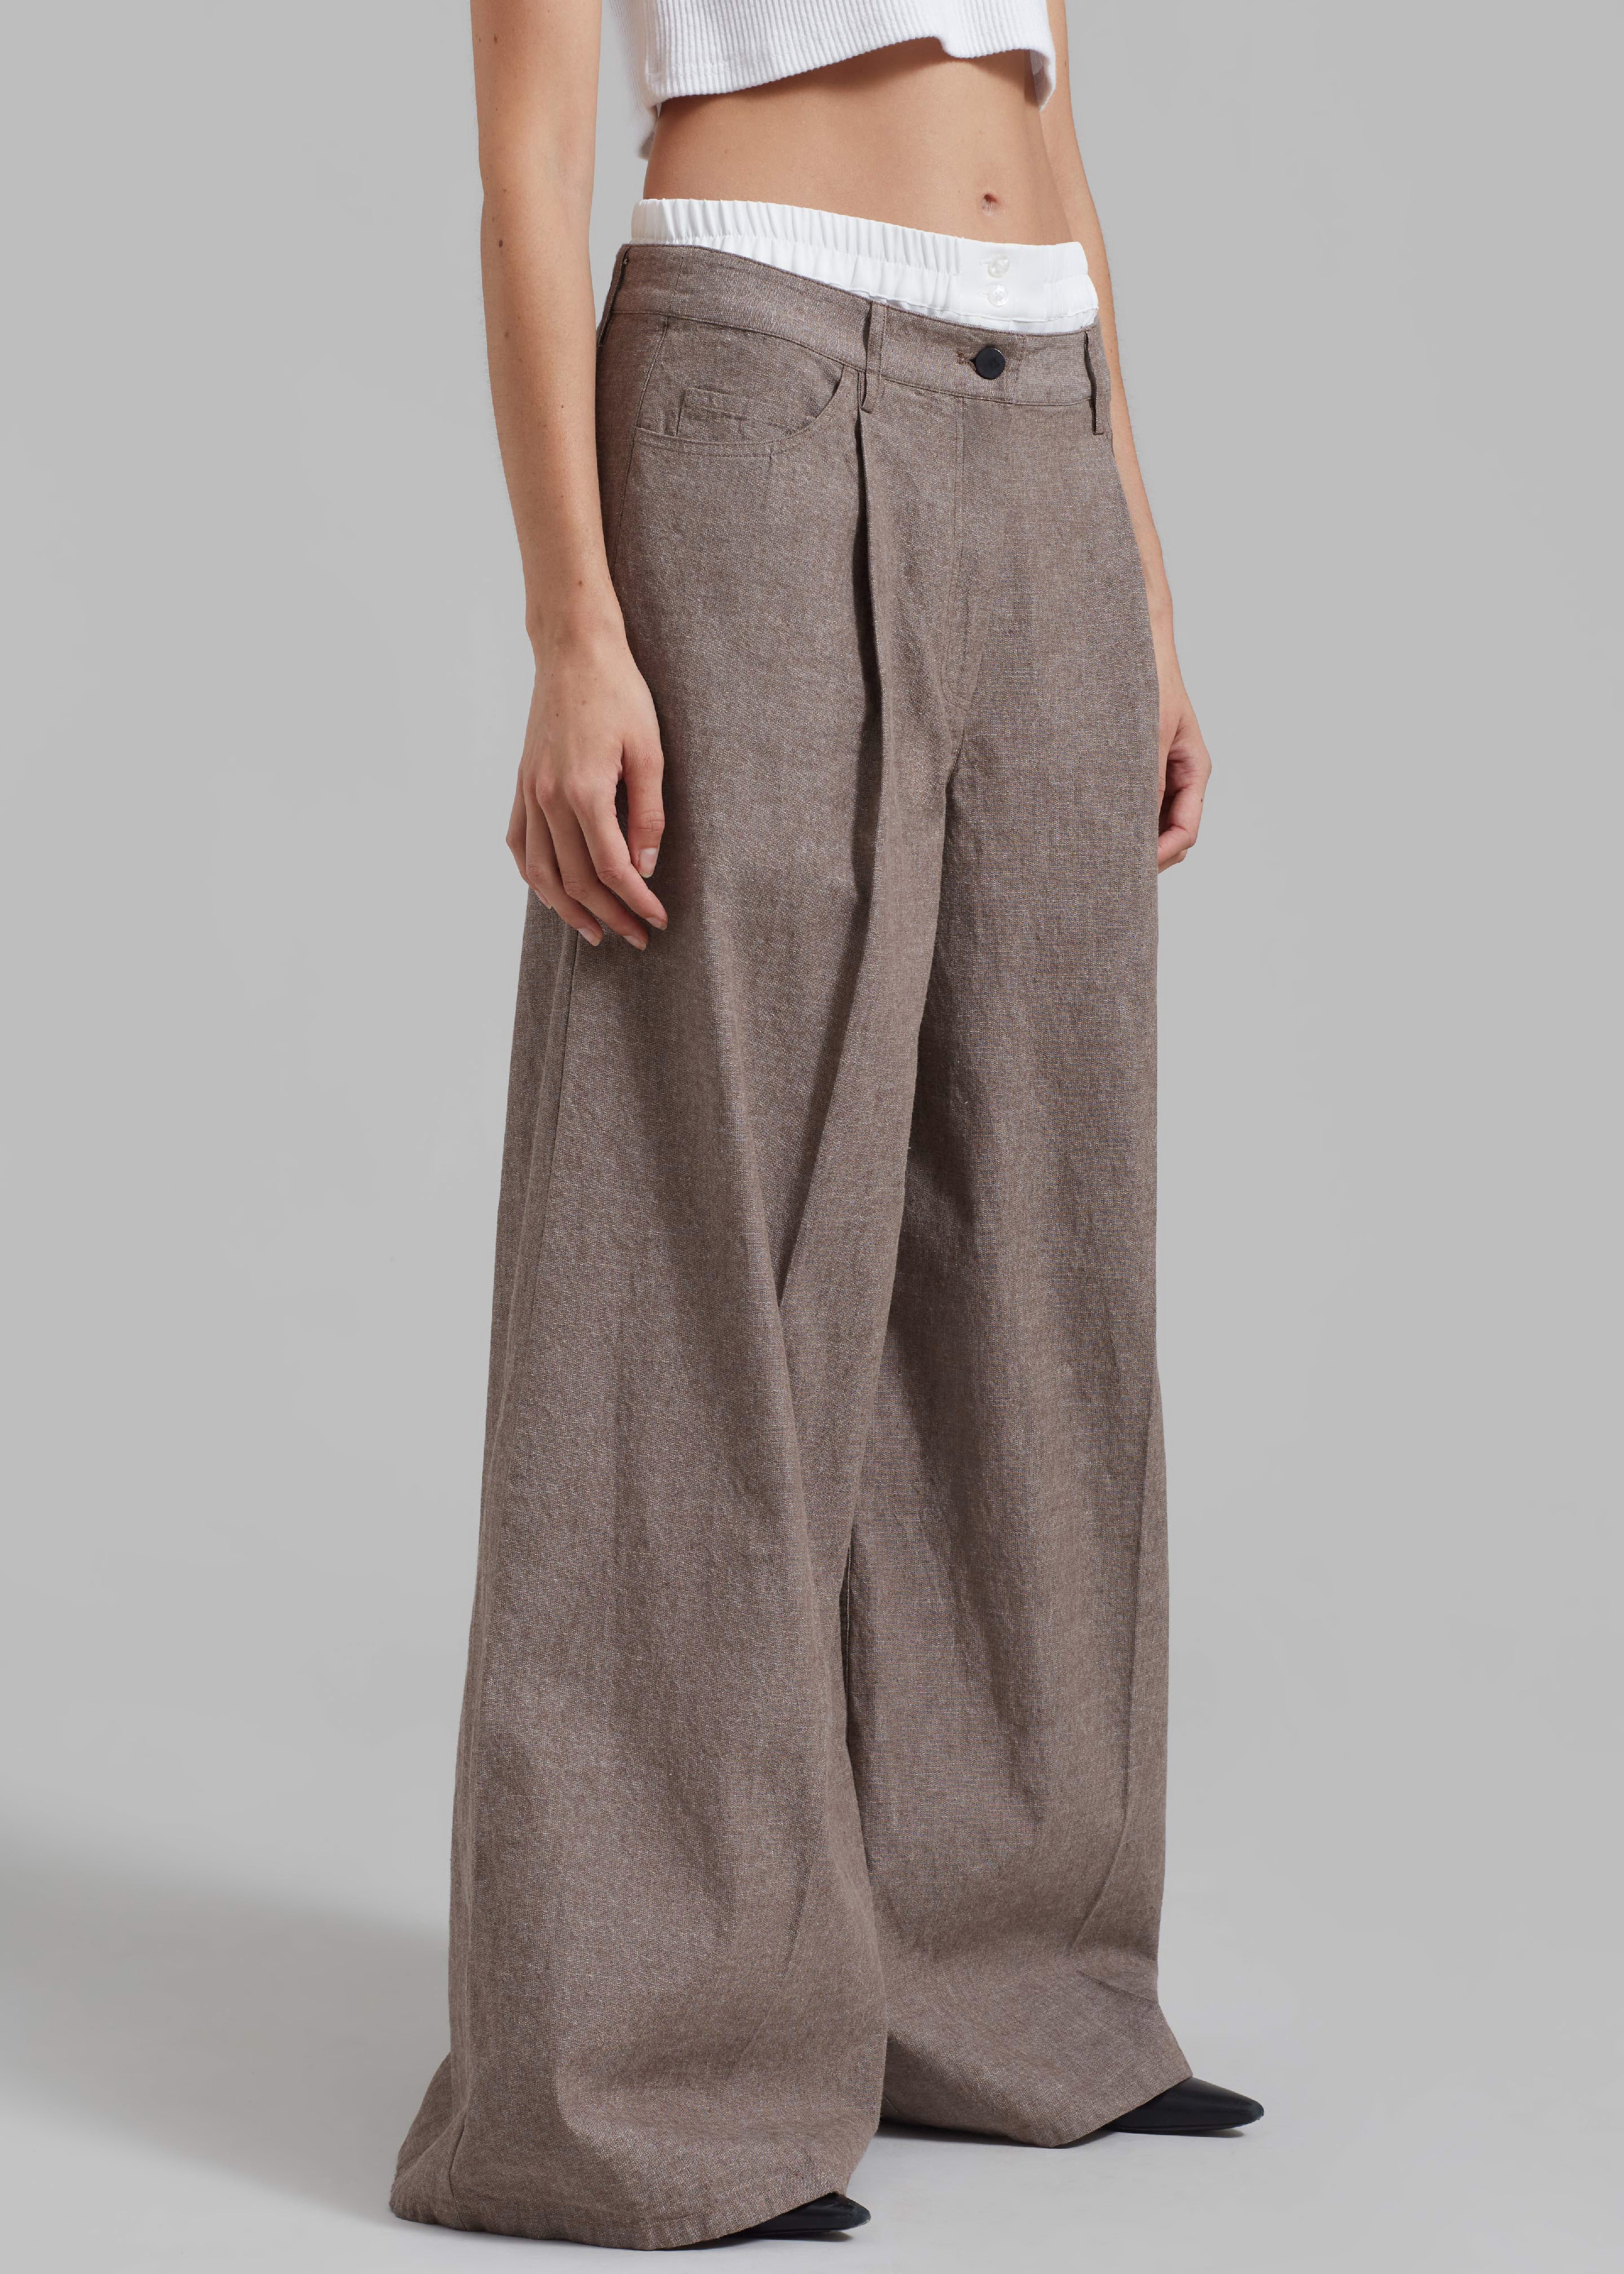 REMAIN Textured Wide Pants - Deep Taupe - 4